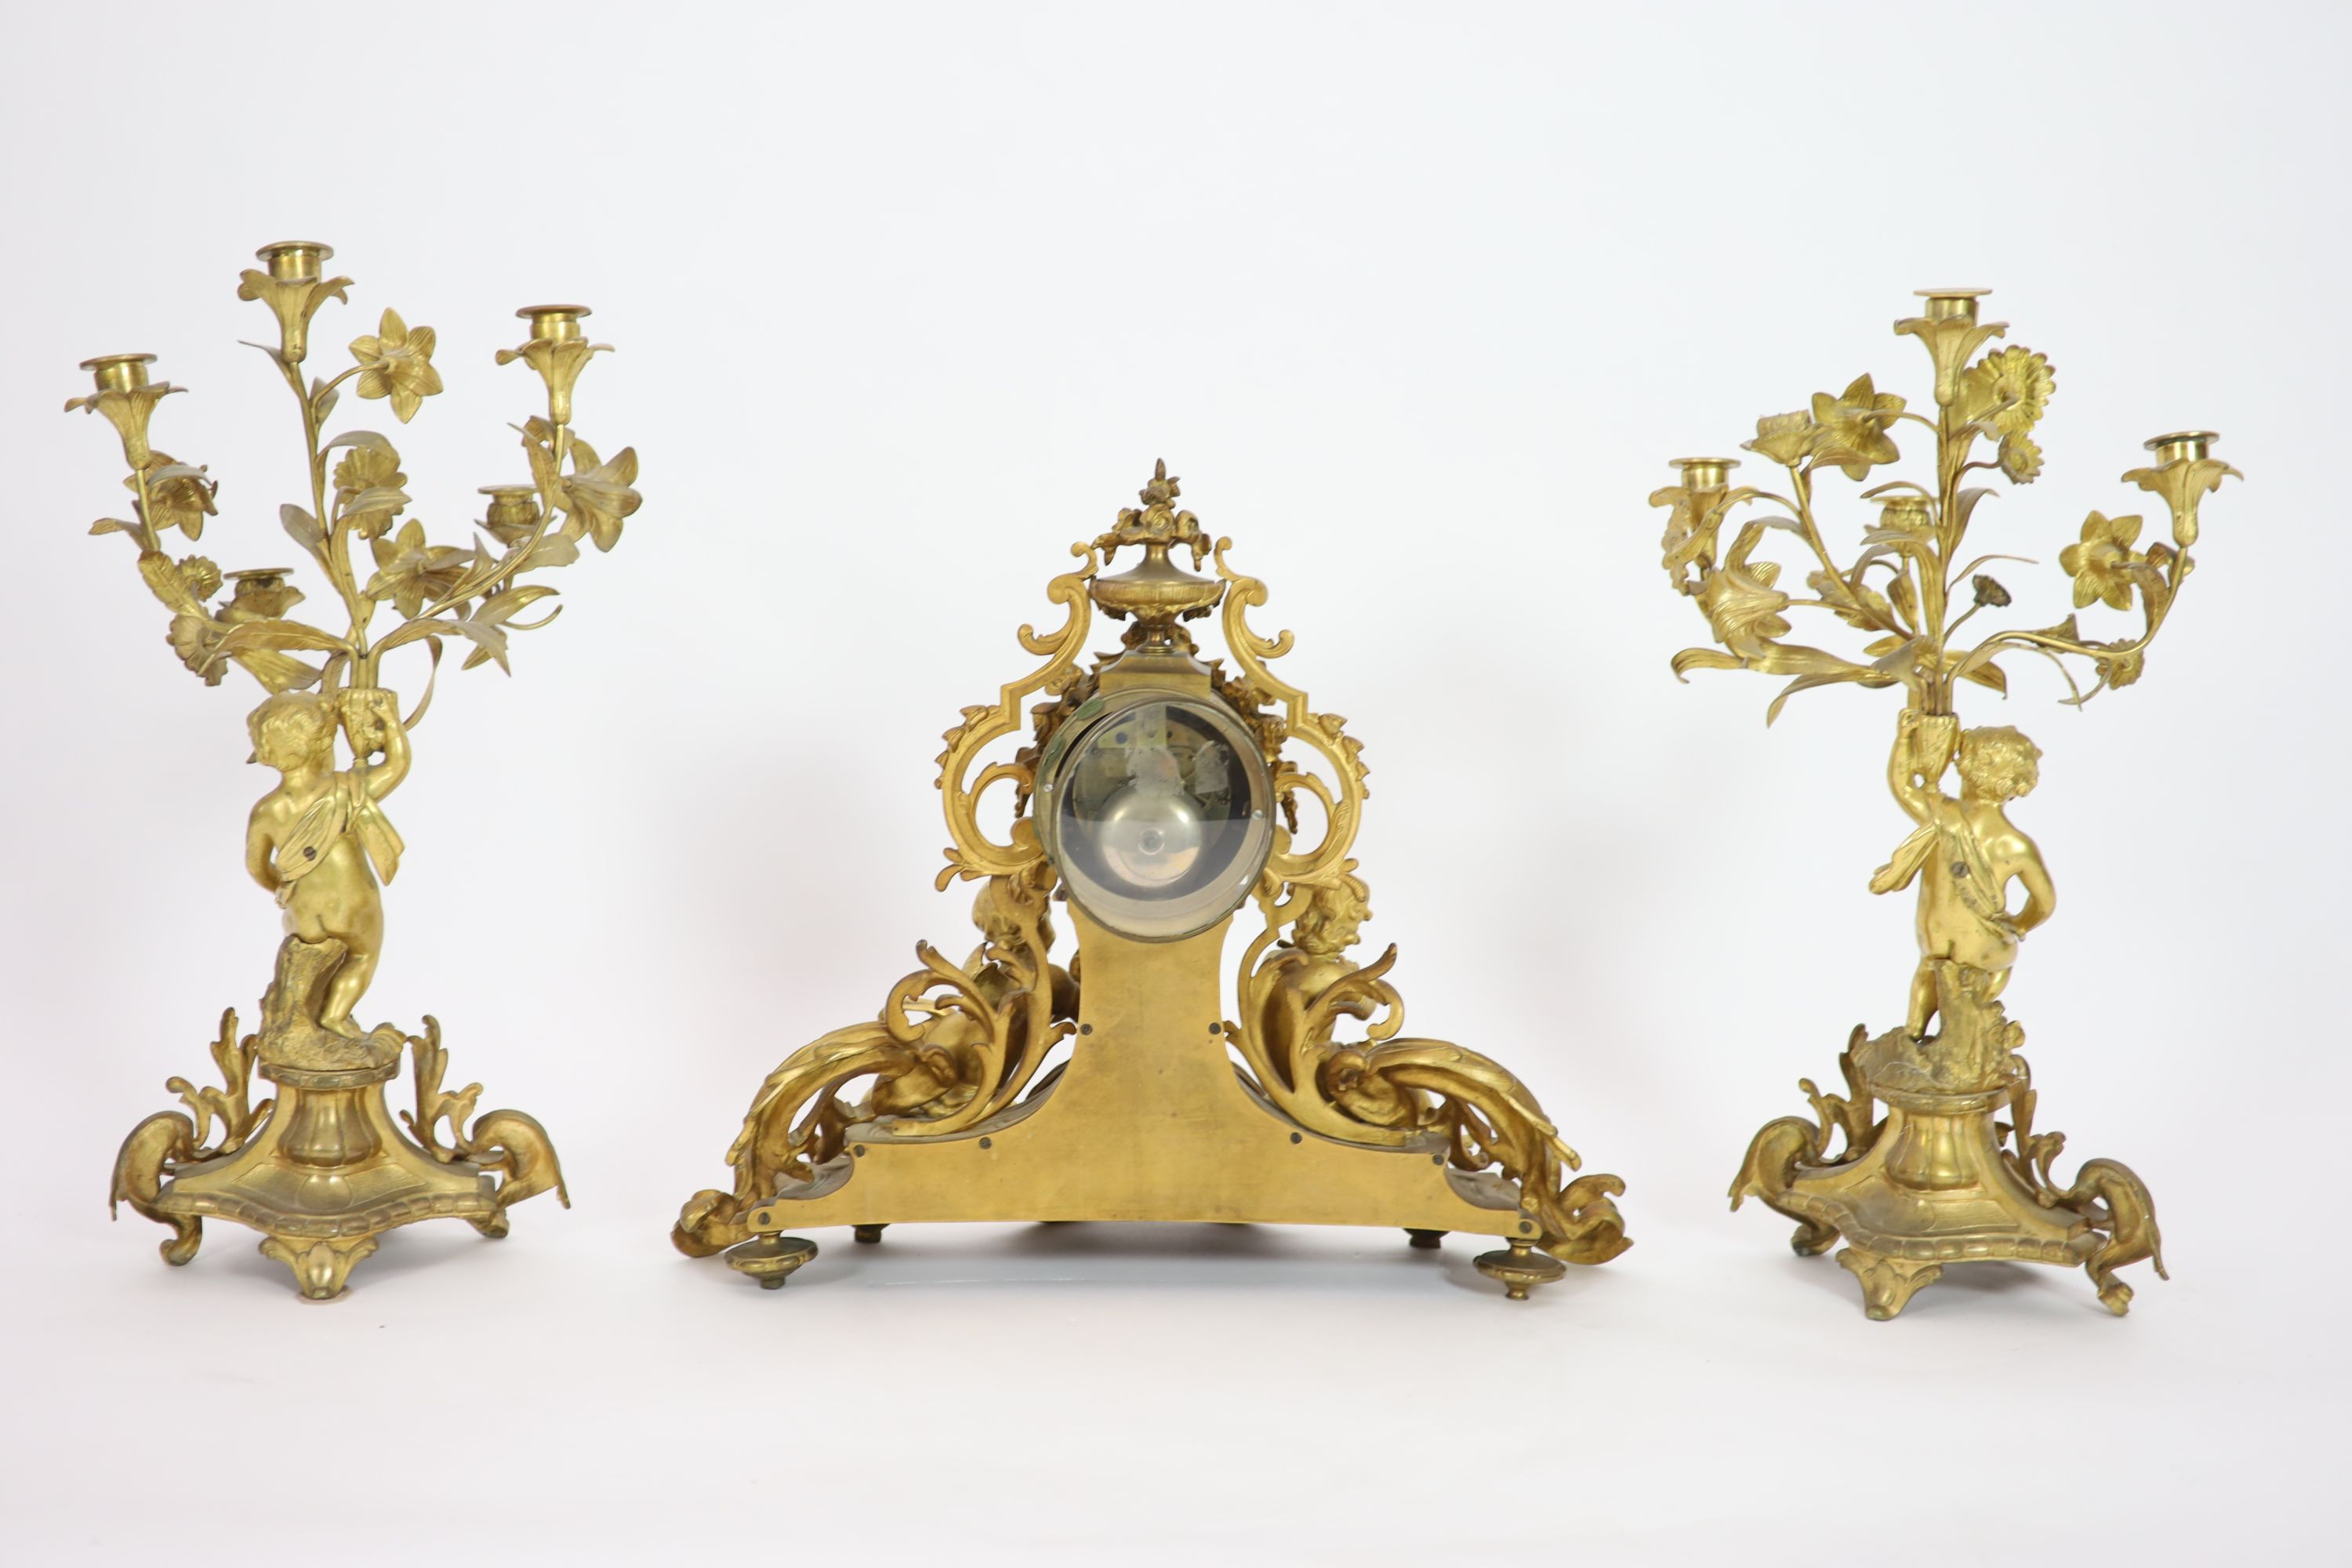 A 19th century Louis XV style ormolu clock garniture,the timepiece modelled with flowers and scrolls - Image 5 of 6